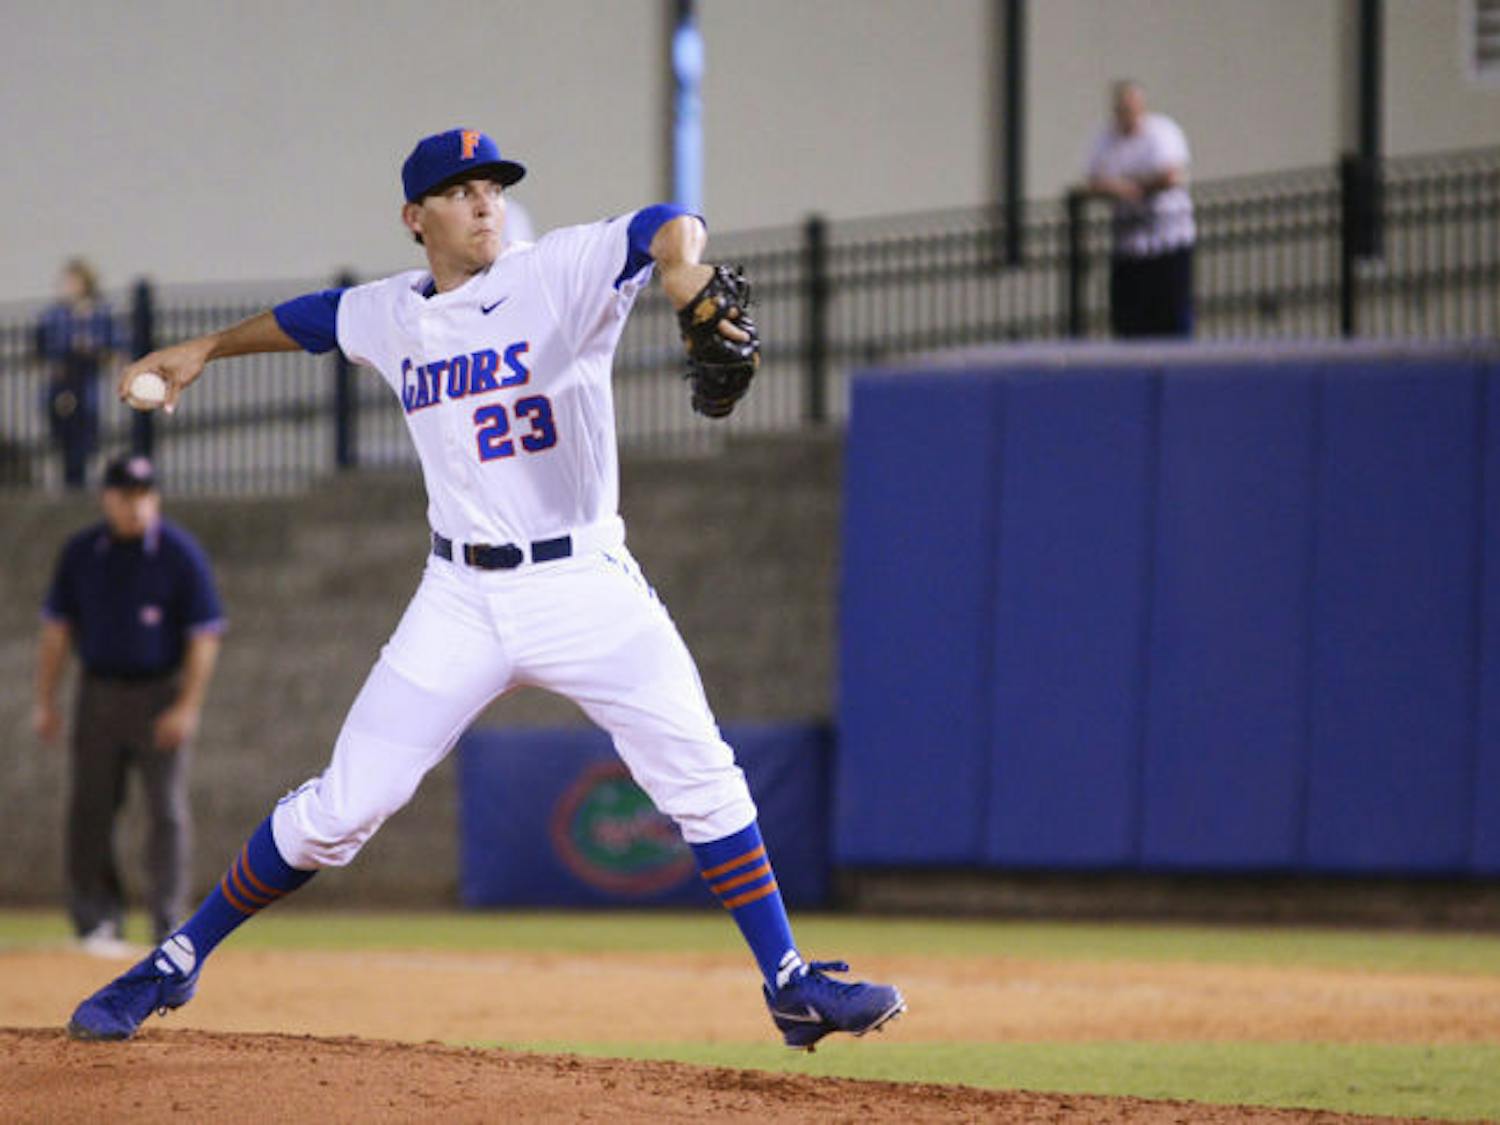 Right-hander Jonathon Crawford throws a pitch during Florida’s 8-2 loss to Florida Gulf Coast on Feb 22 at McKethan Stadium. Selected 20th by the Detroit Tigers in the first round of the MLB Draft on Thursday, Crawford&nbsp;is the highest Florida pitcher taken since John Burke went sixth to the Houston Astros in 1991.
&nbsp;